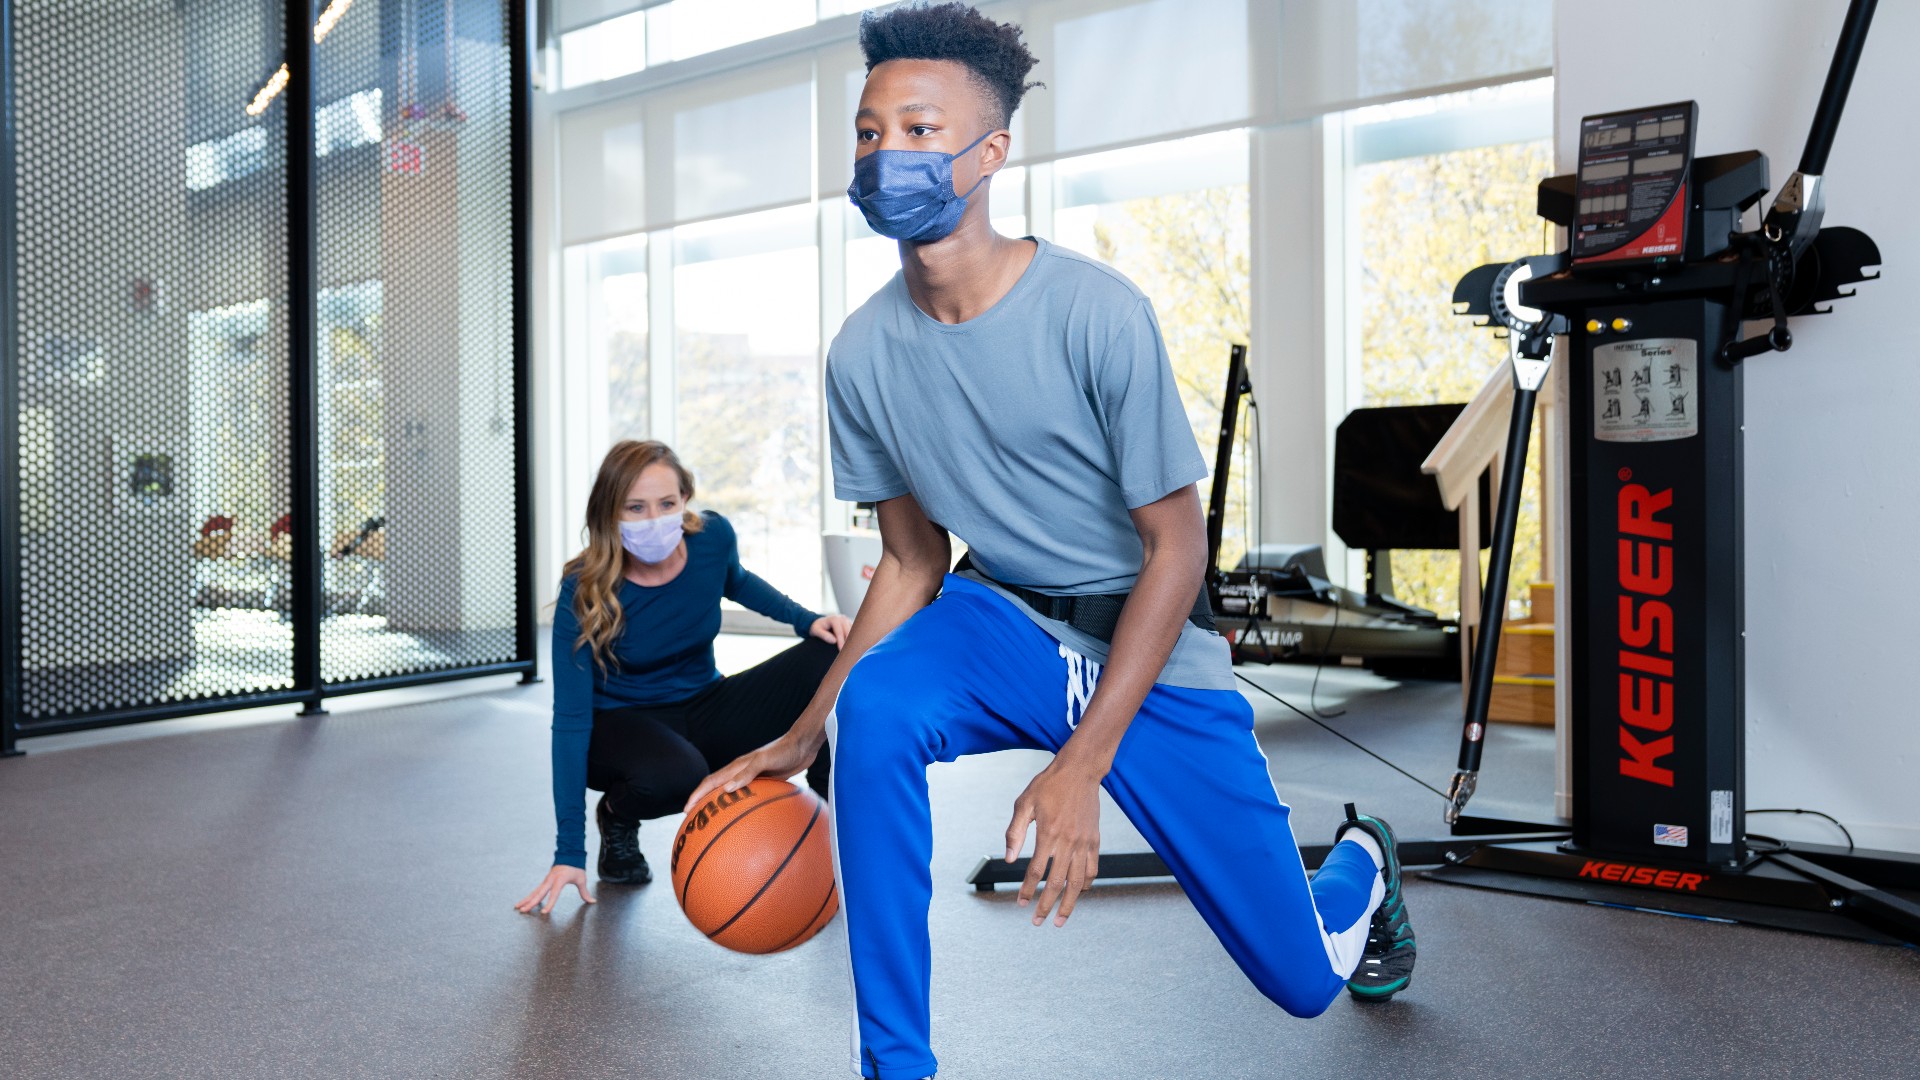 Teenage boy dribbling a basketball while Physical Therapist observes